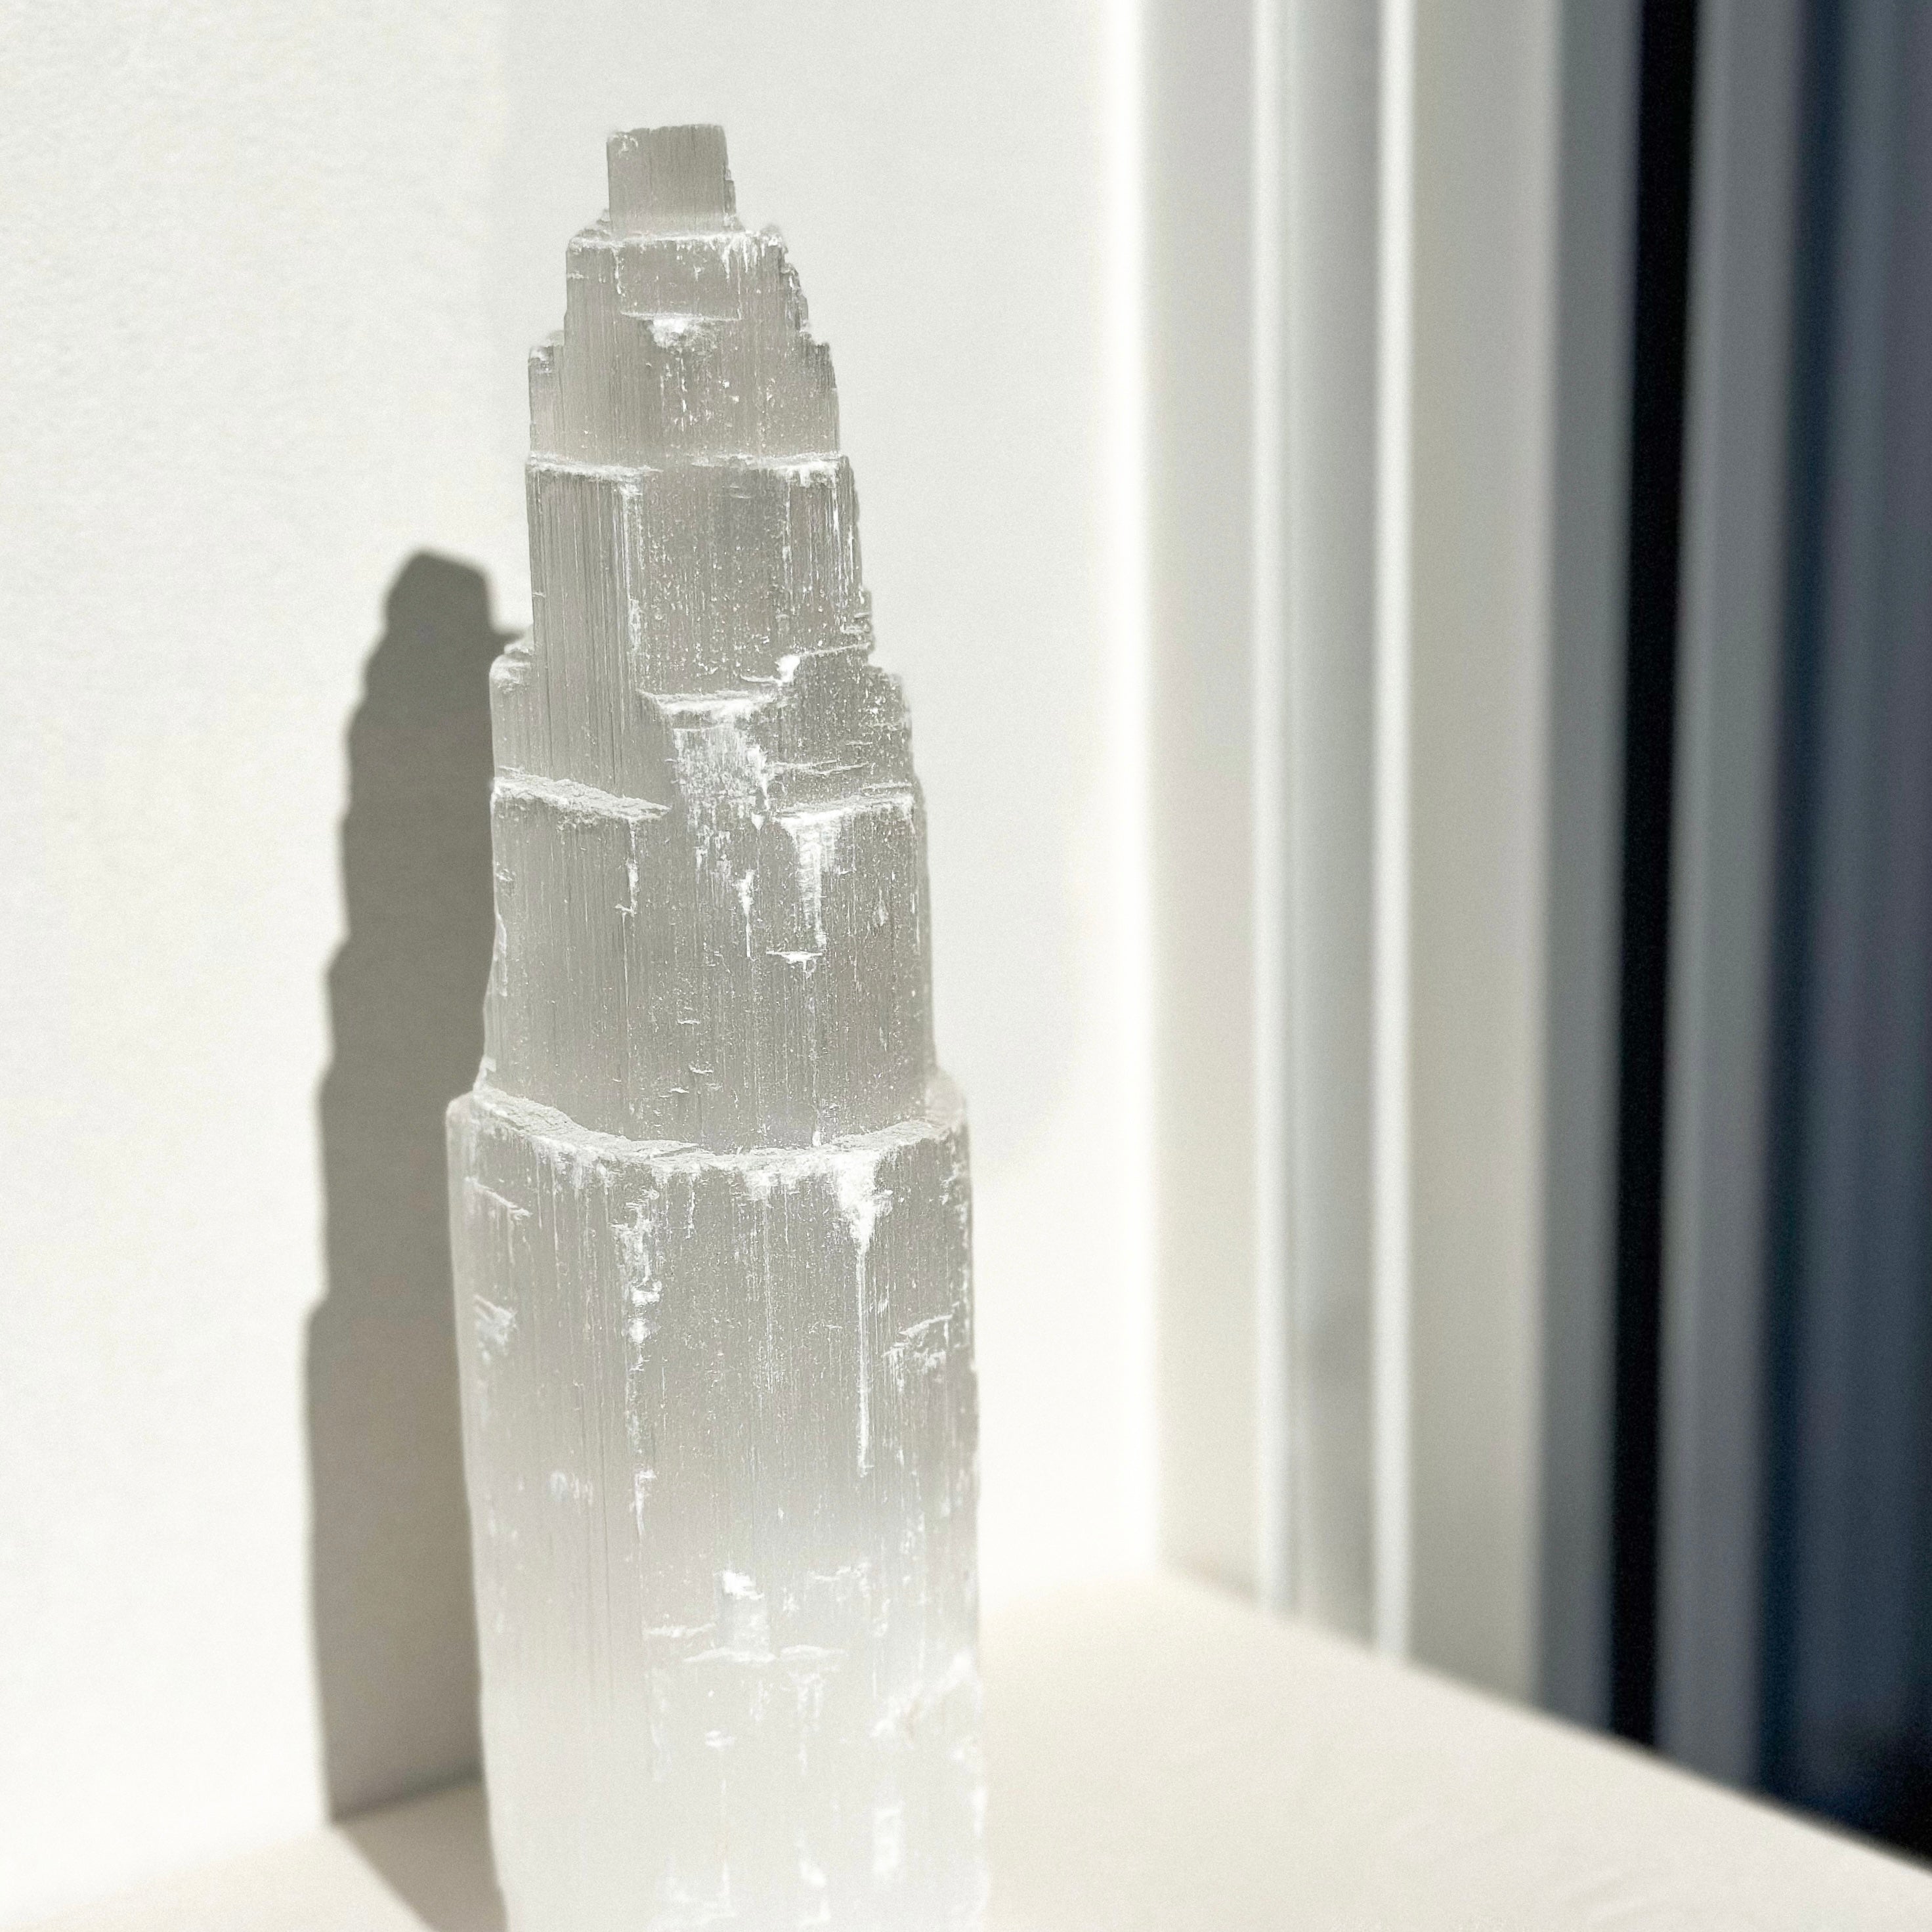 CATHEDRAL TOWER - SELENITE